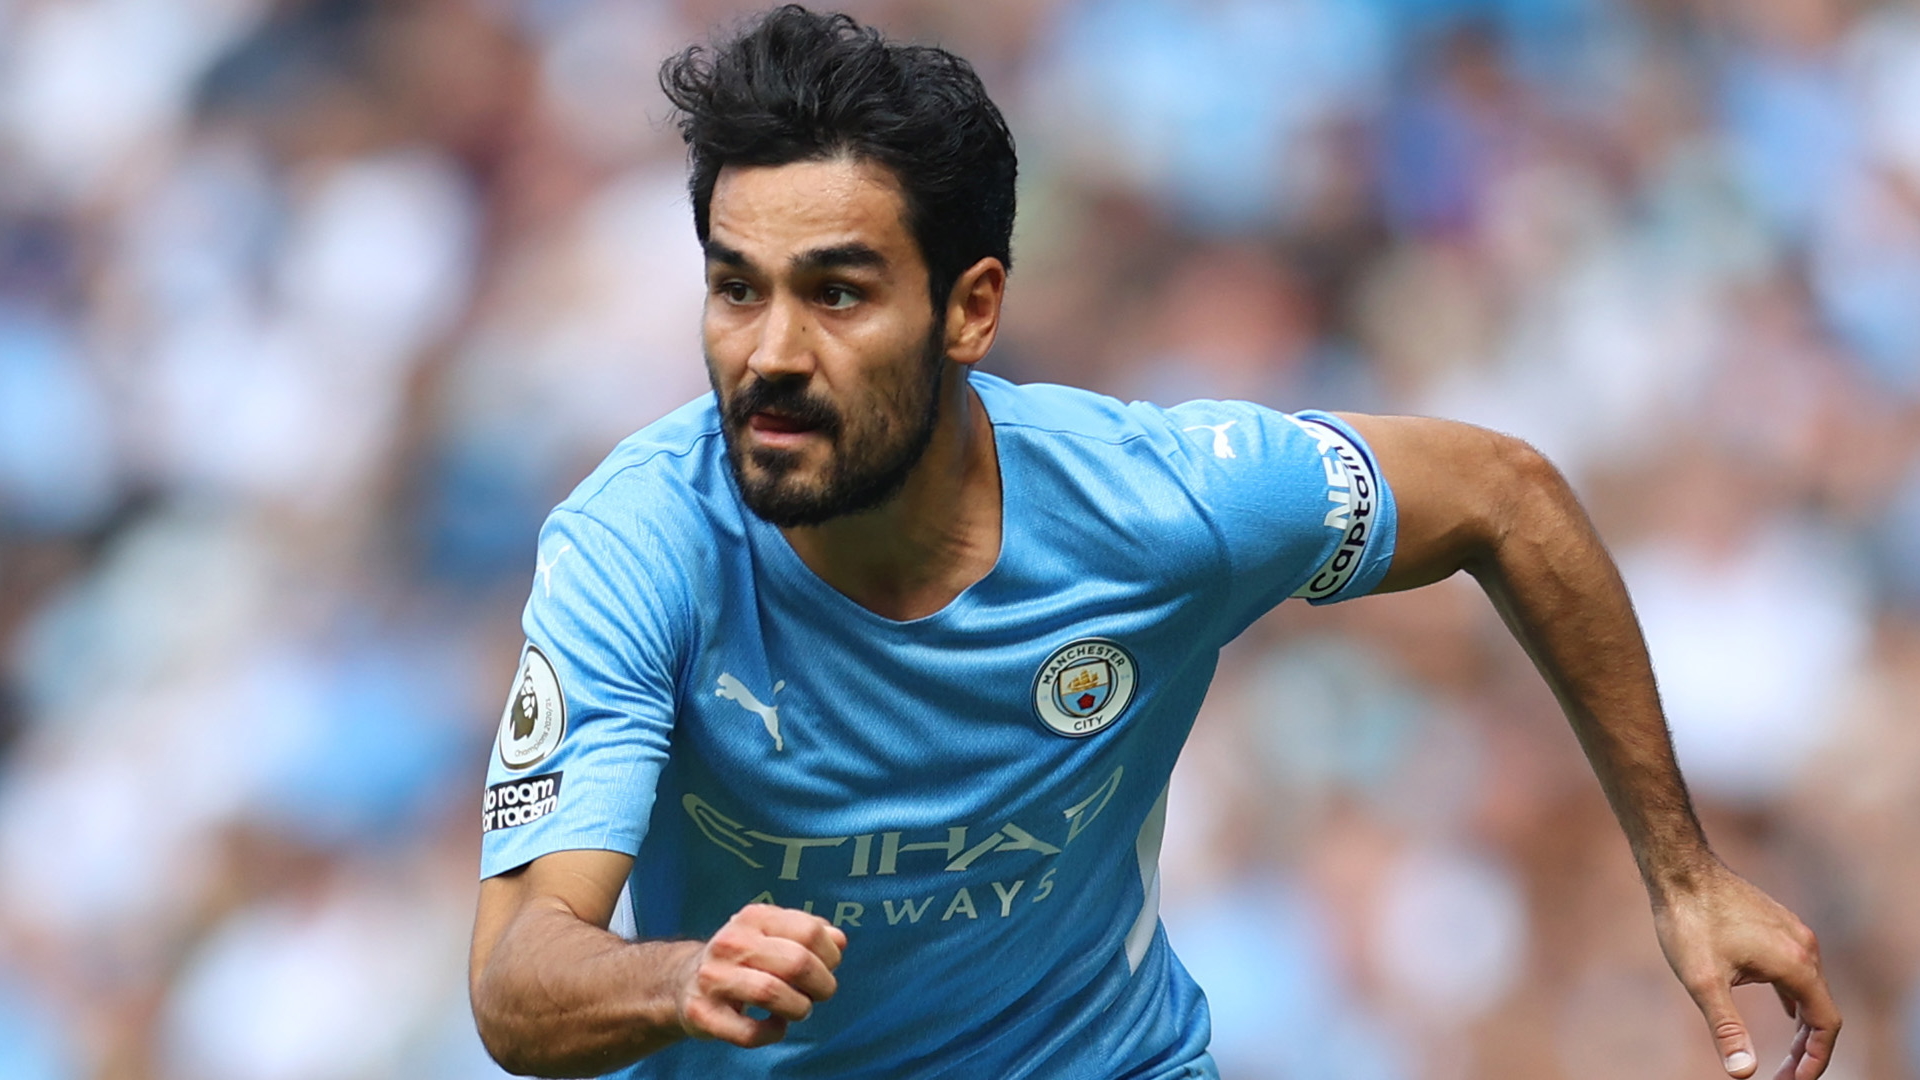 'It could have been 3-0 or 4-0' - Gundogan says Man Utd got off lightly and Man City found derby 'enjoyable'